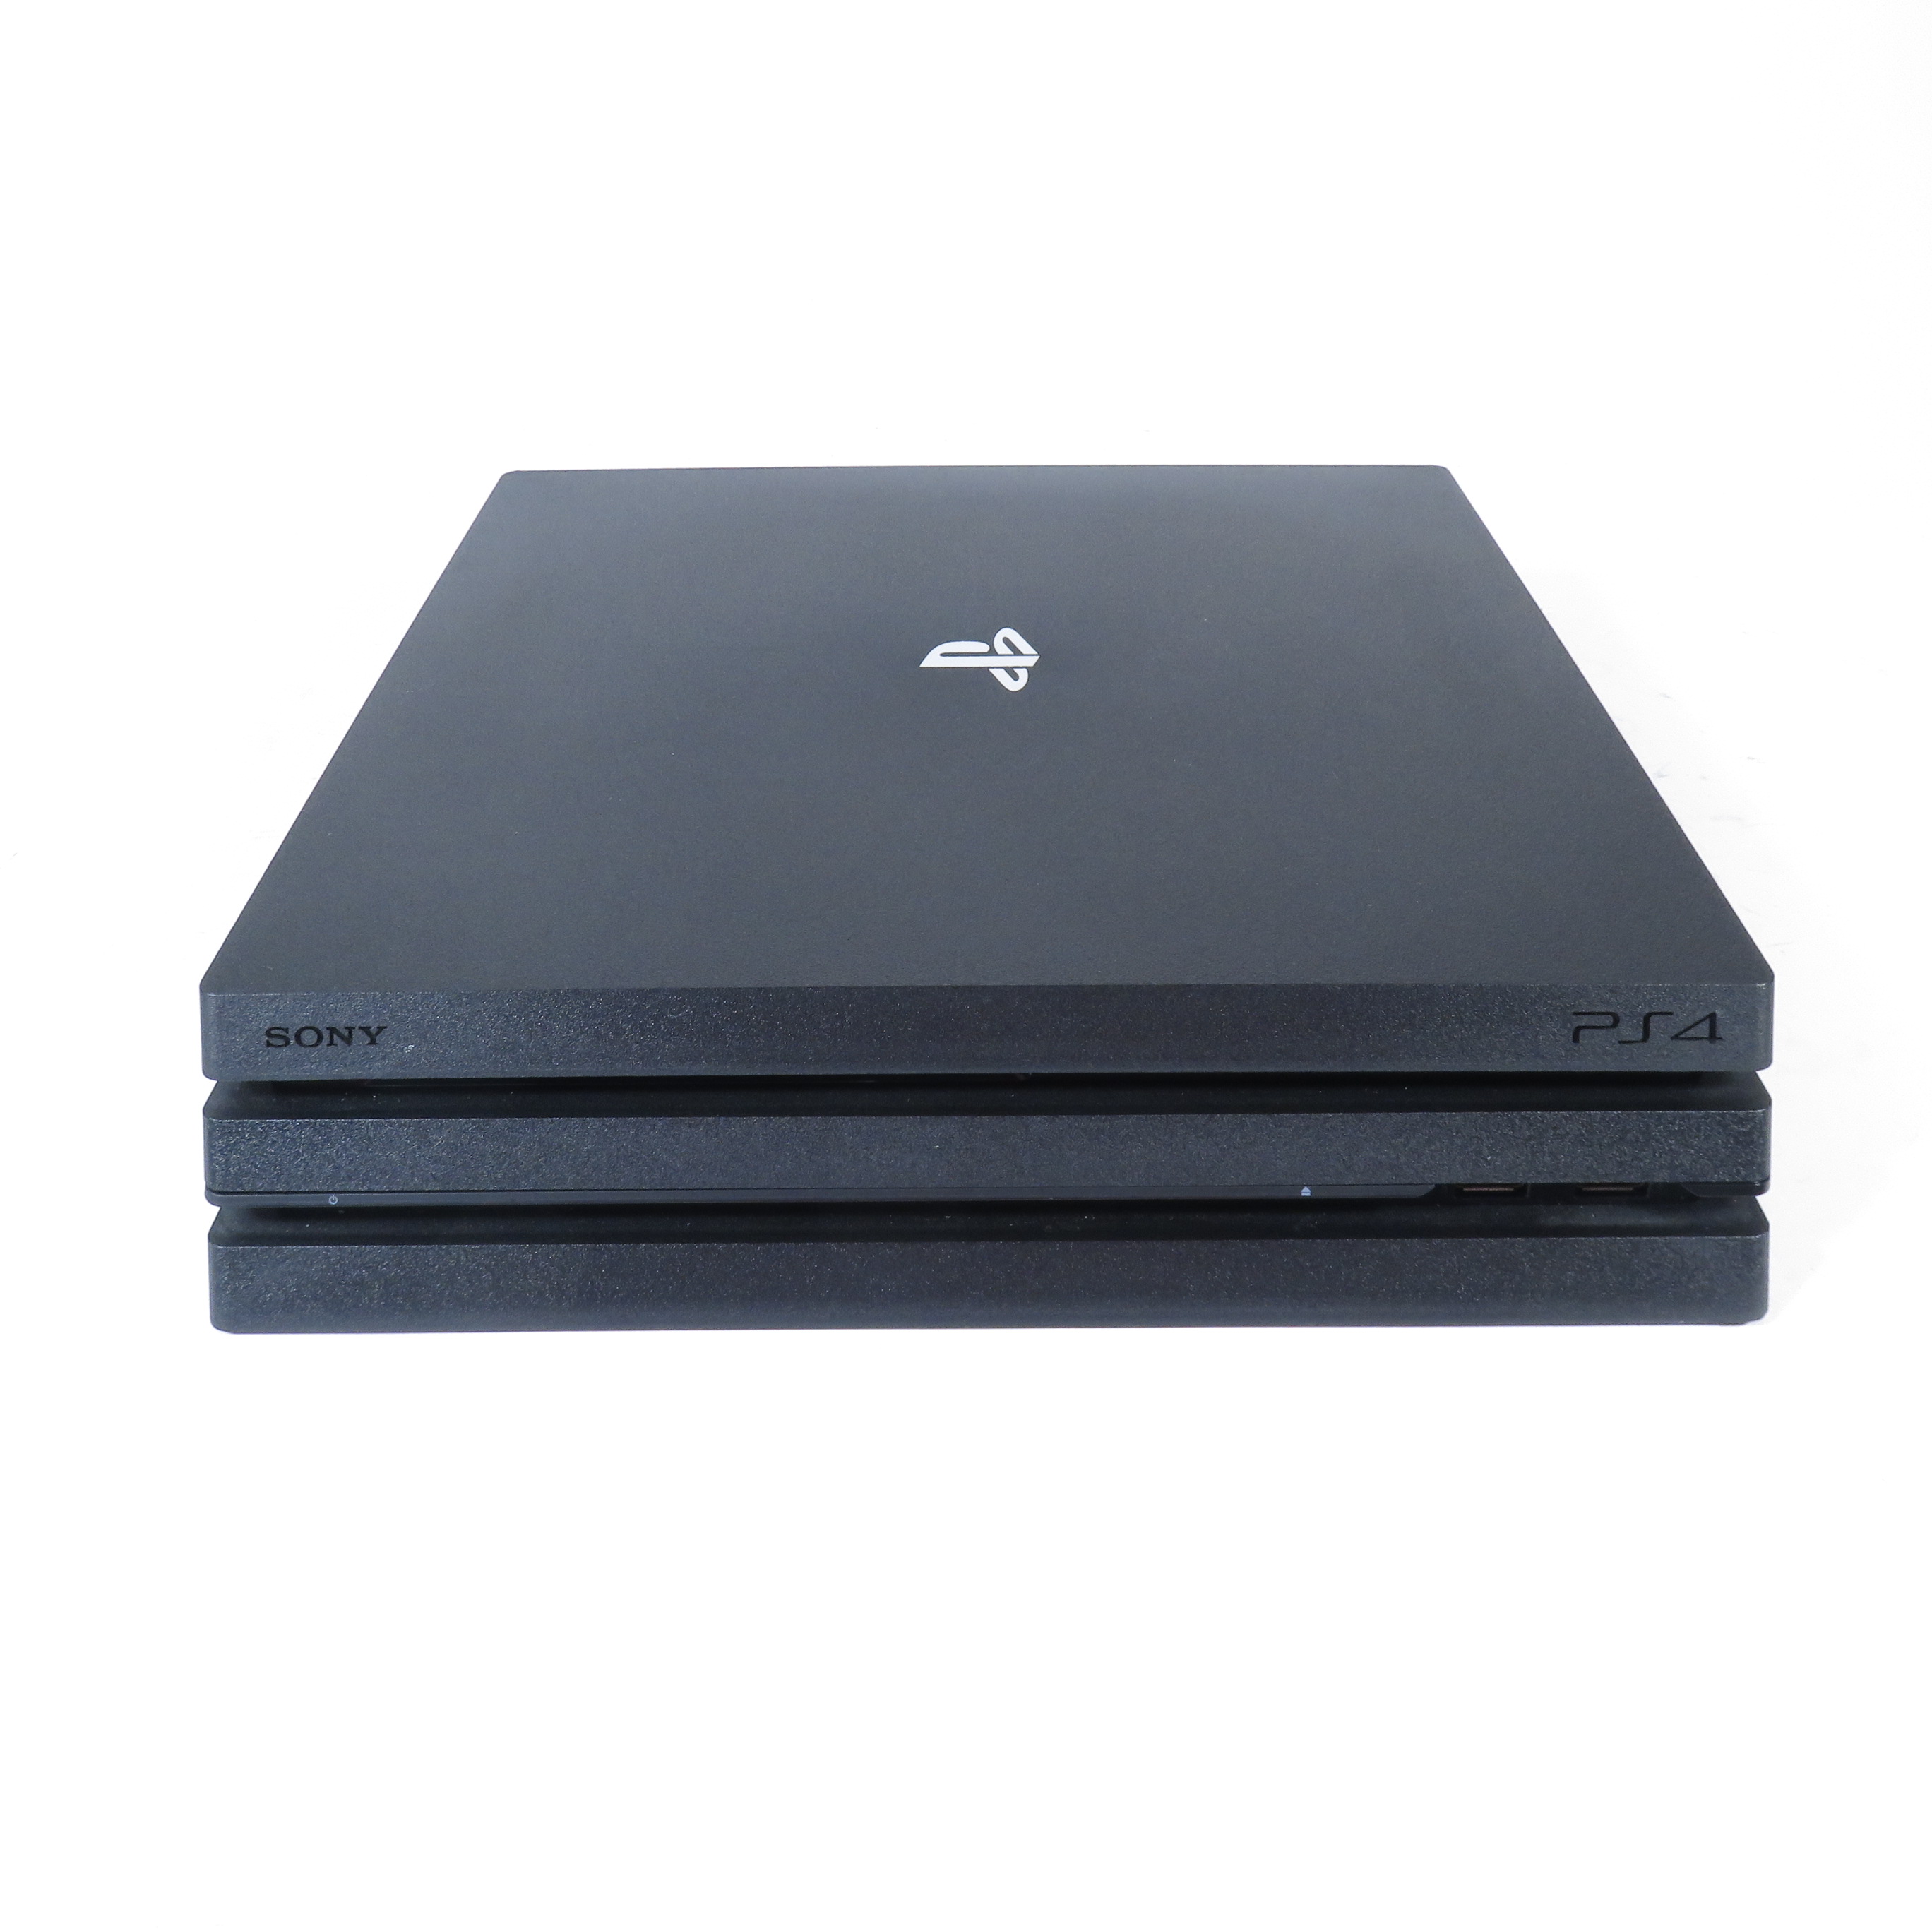 Sony PlayStation 4 Pro CUH-7115B 1TB HDD 4K UHD Home Video Game Console 7503